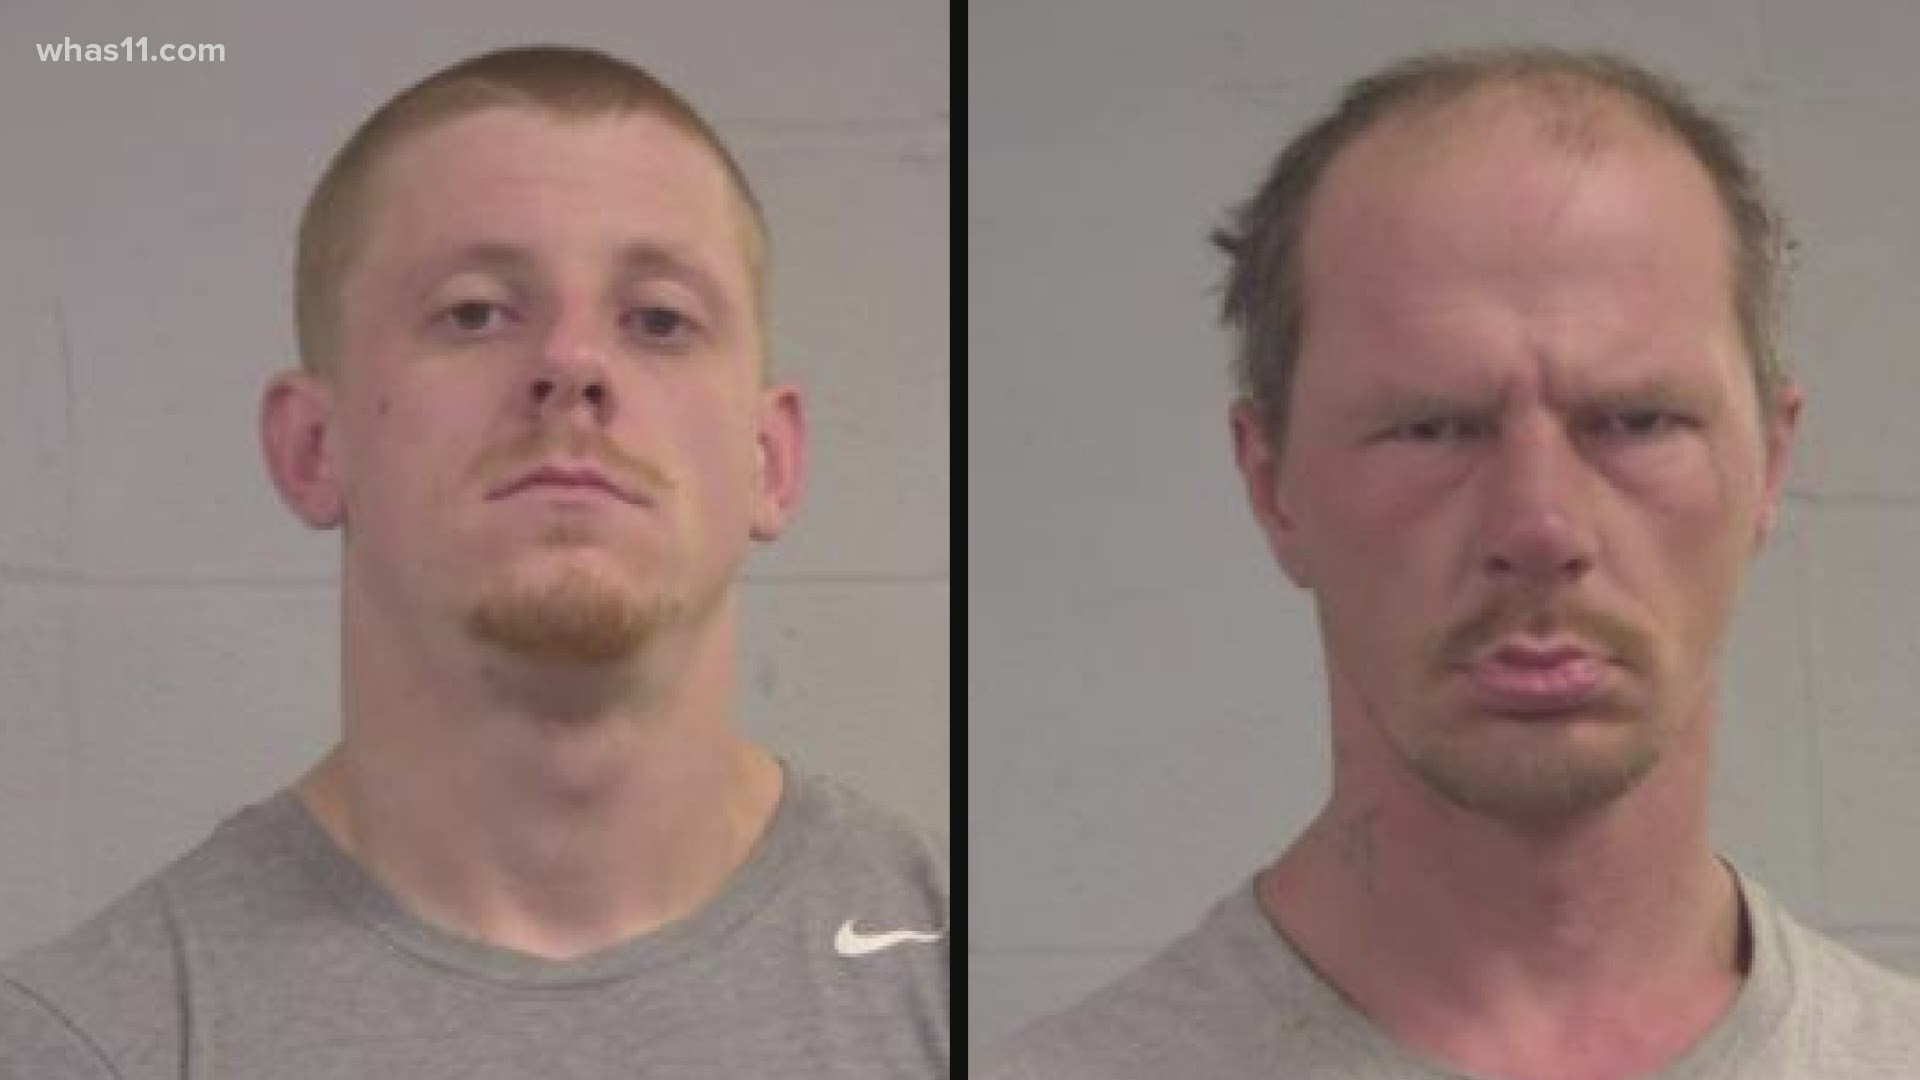 Daniel Allen and Joshua Griffin are both facing multiple charges following Thursday's incident.